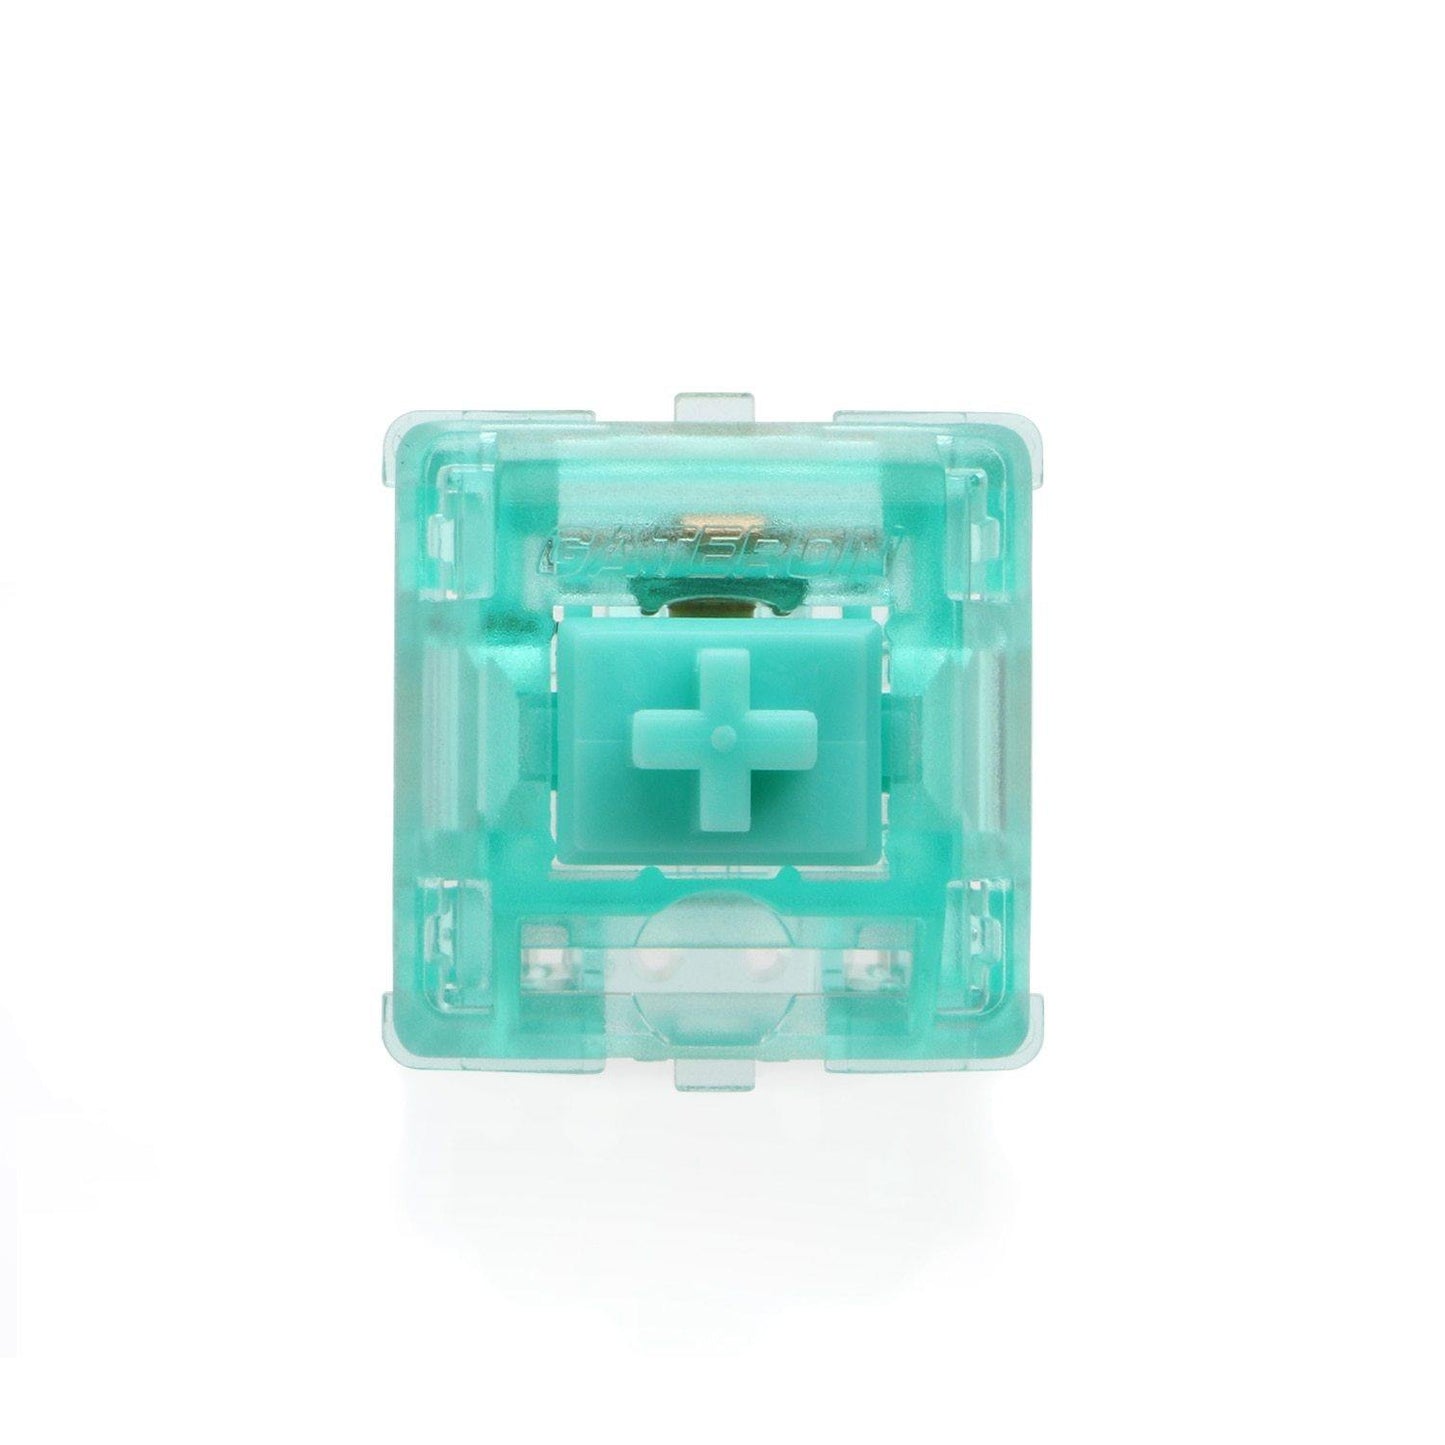 TURQUOISE TEALIO LINEAR SWITCHES - THE KEYCAP CLUB